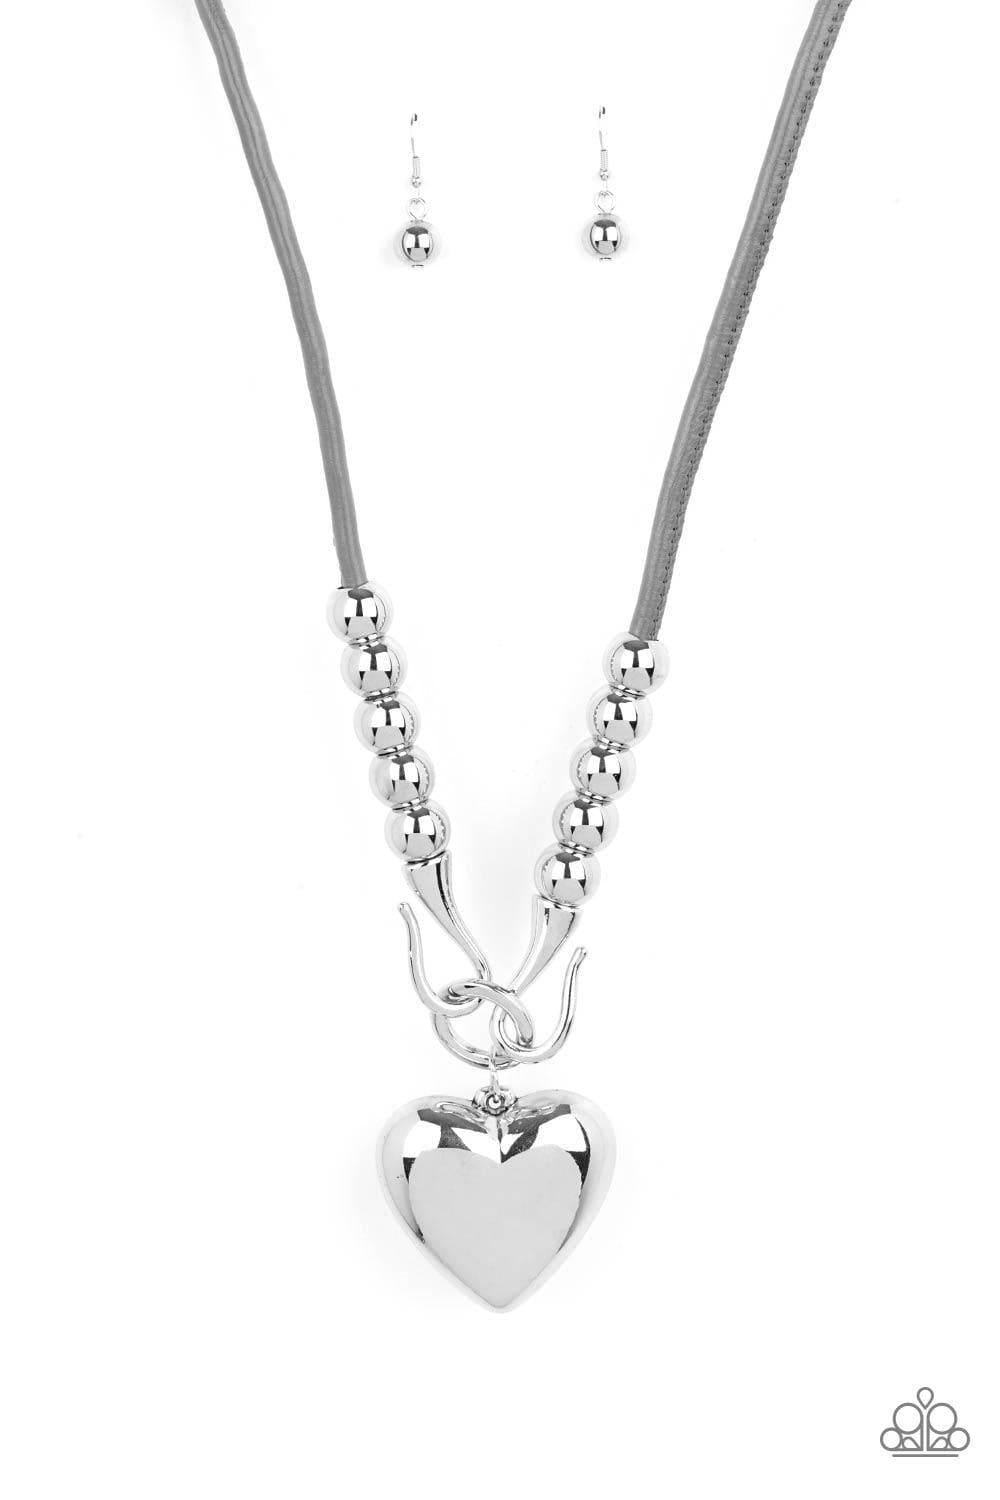 Paparazzi Accessories - Forbidden Love - Silver Necklace - Bling by JessieK